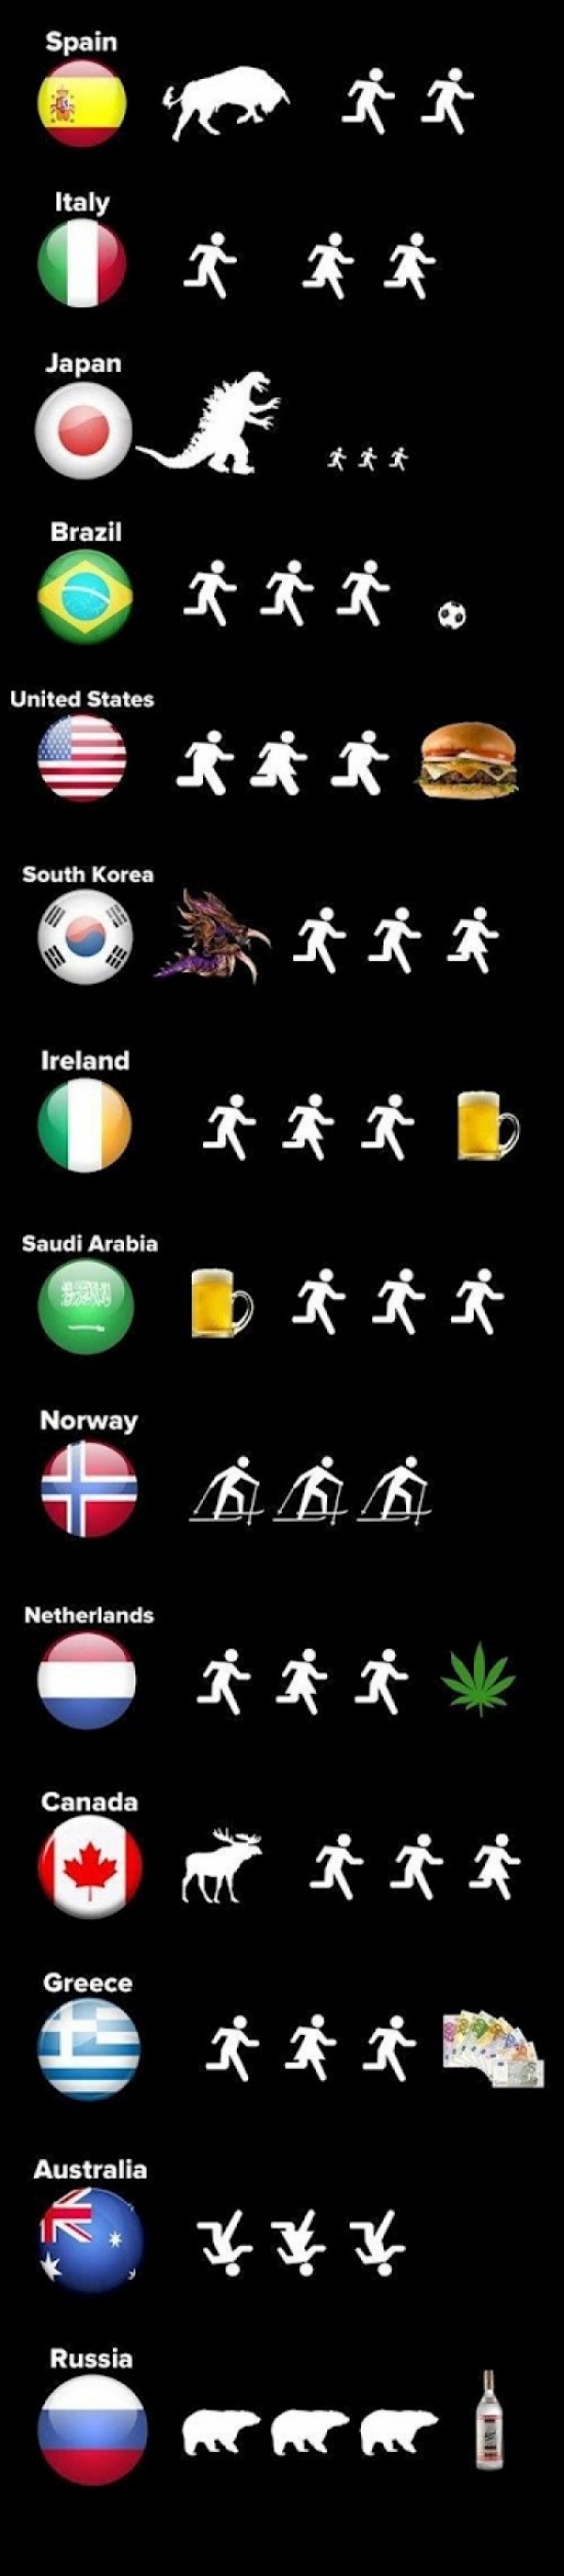 Different Countries Explained